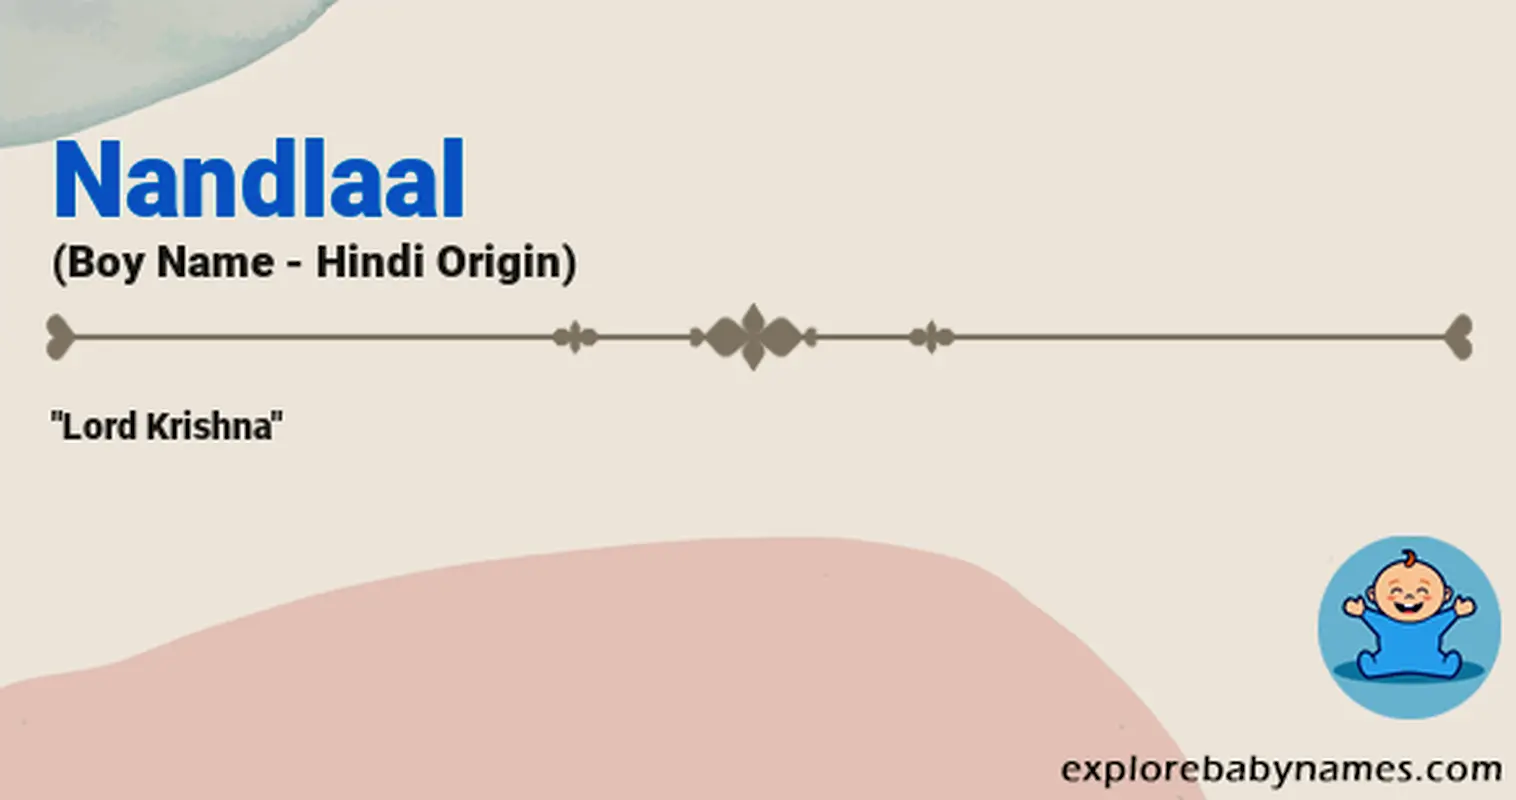 Meaning of Nandlaal